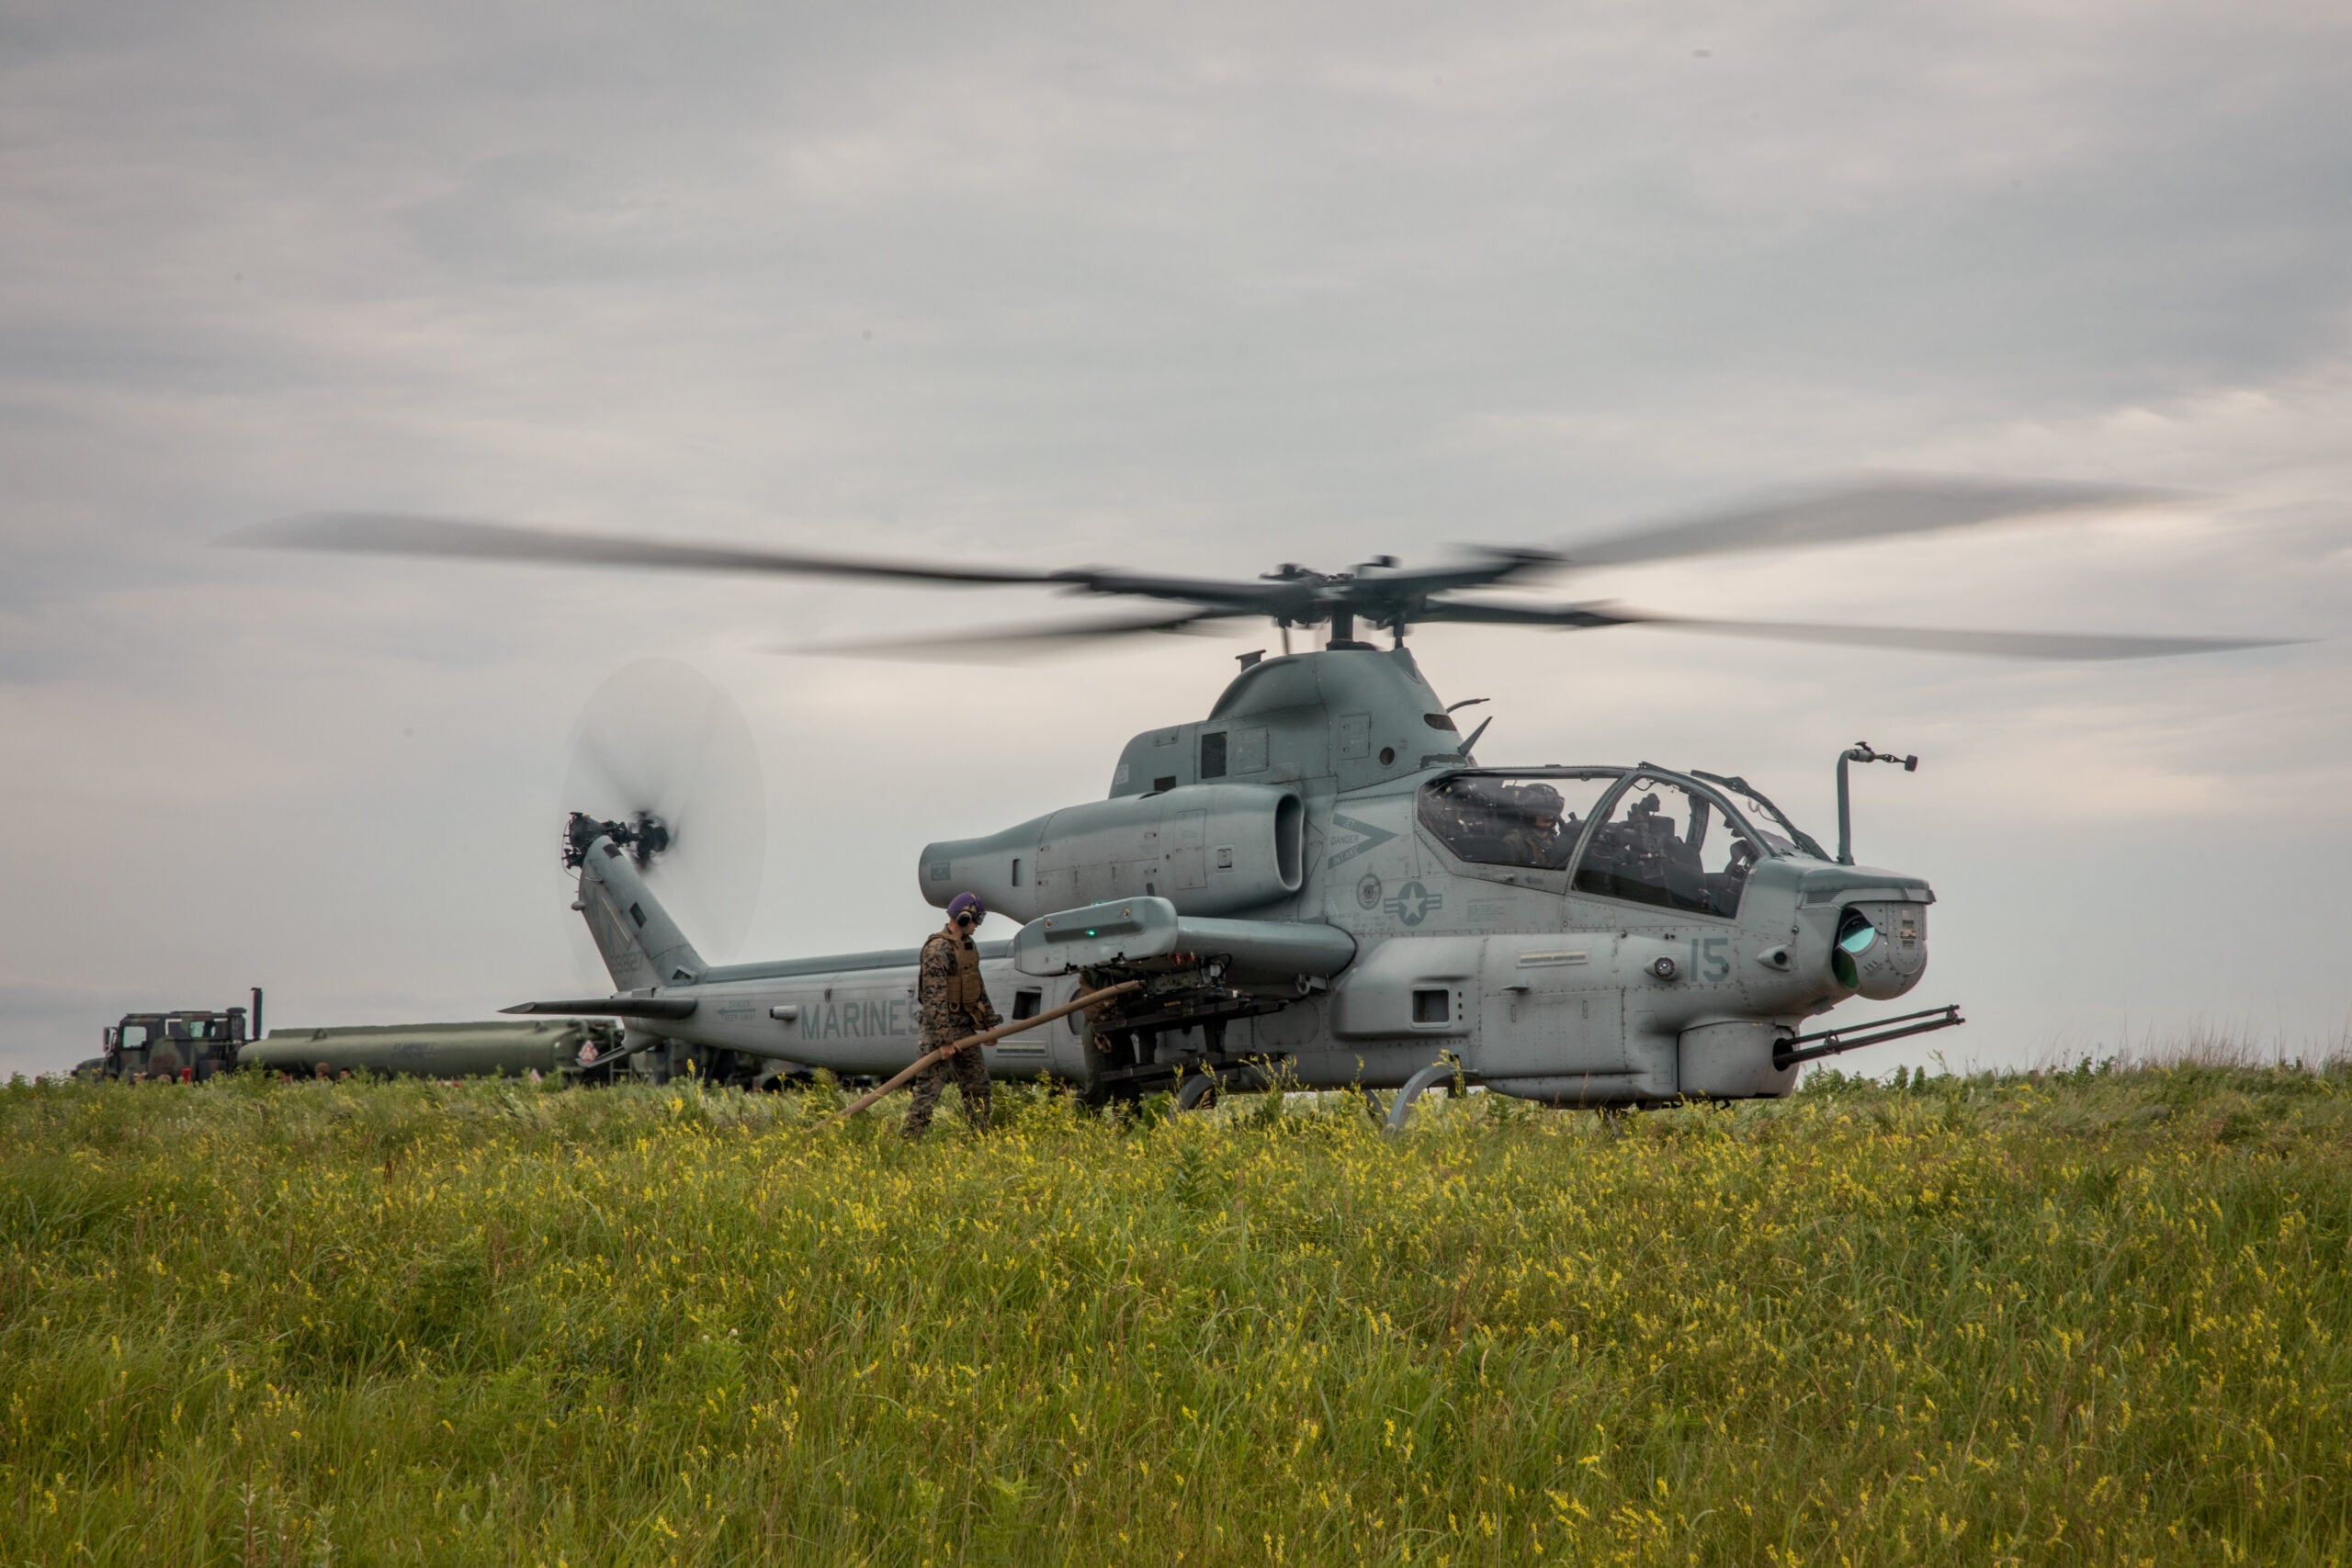 A U.S. Marine Corps AH-1Z Viper from Marine Light Attack Helicopter Squadron (HMLA) 773 Detachment A, 4th Marine Aircraft Wing, receives refueling within a Forward Arming and Refueling Point (FARP) at exercise Gunslinger 22 in Salina, Kansas, June 22, 2022. Exercise Gunslinger 22 is a joint exercise with the Kansas Air National Guard and U.S. Marine Corps designed to increase aircraft control and training for potential real-world contingencies. (U.S. Marine Corps photo by Lance Cpl. David Intriago)